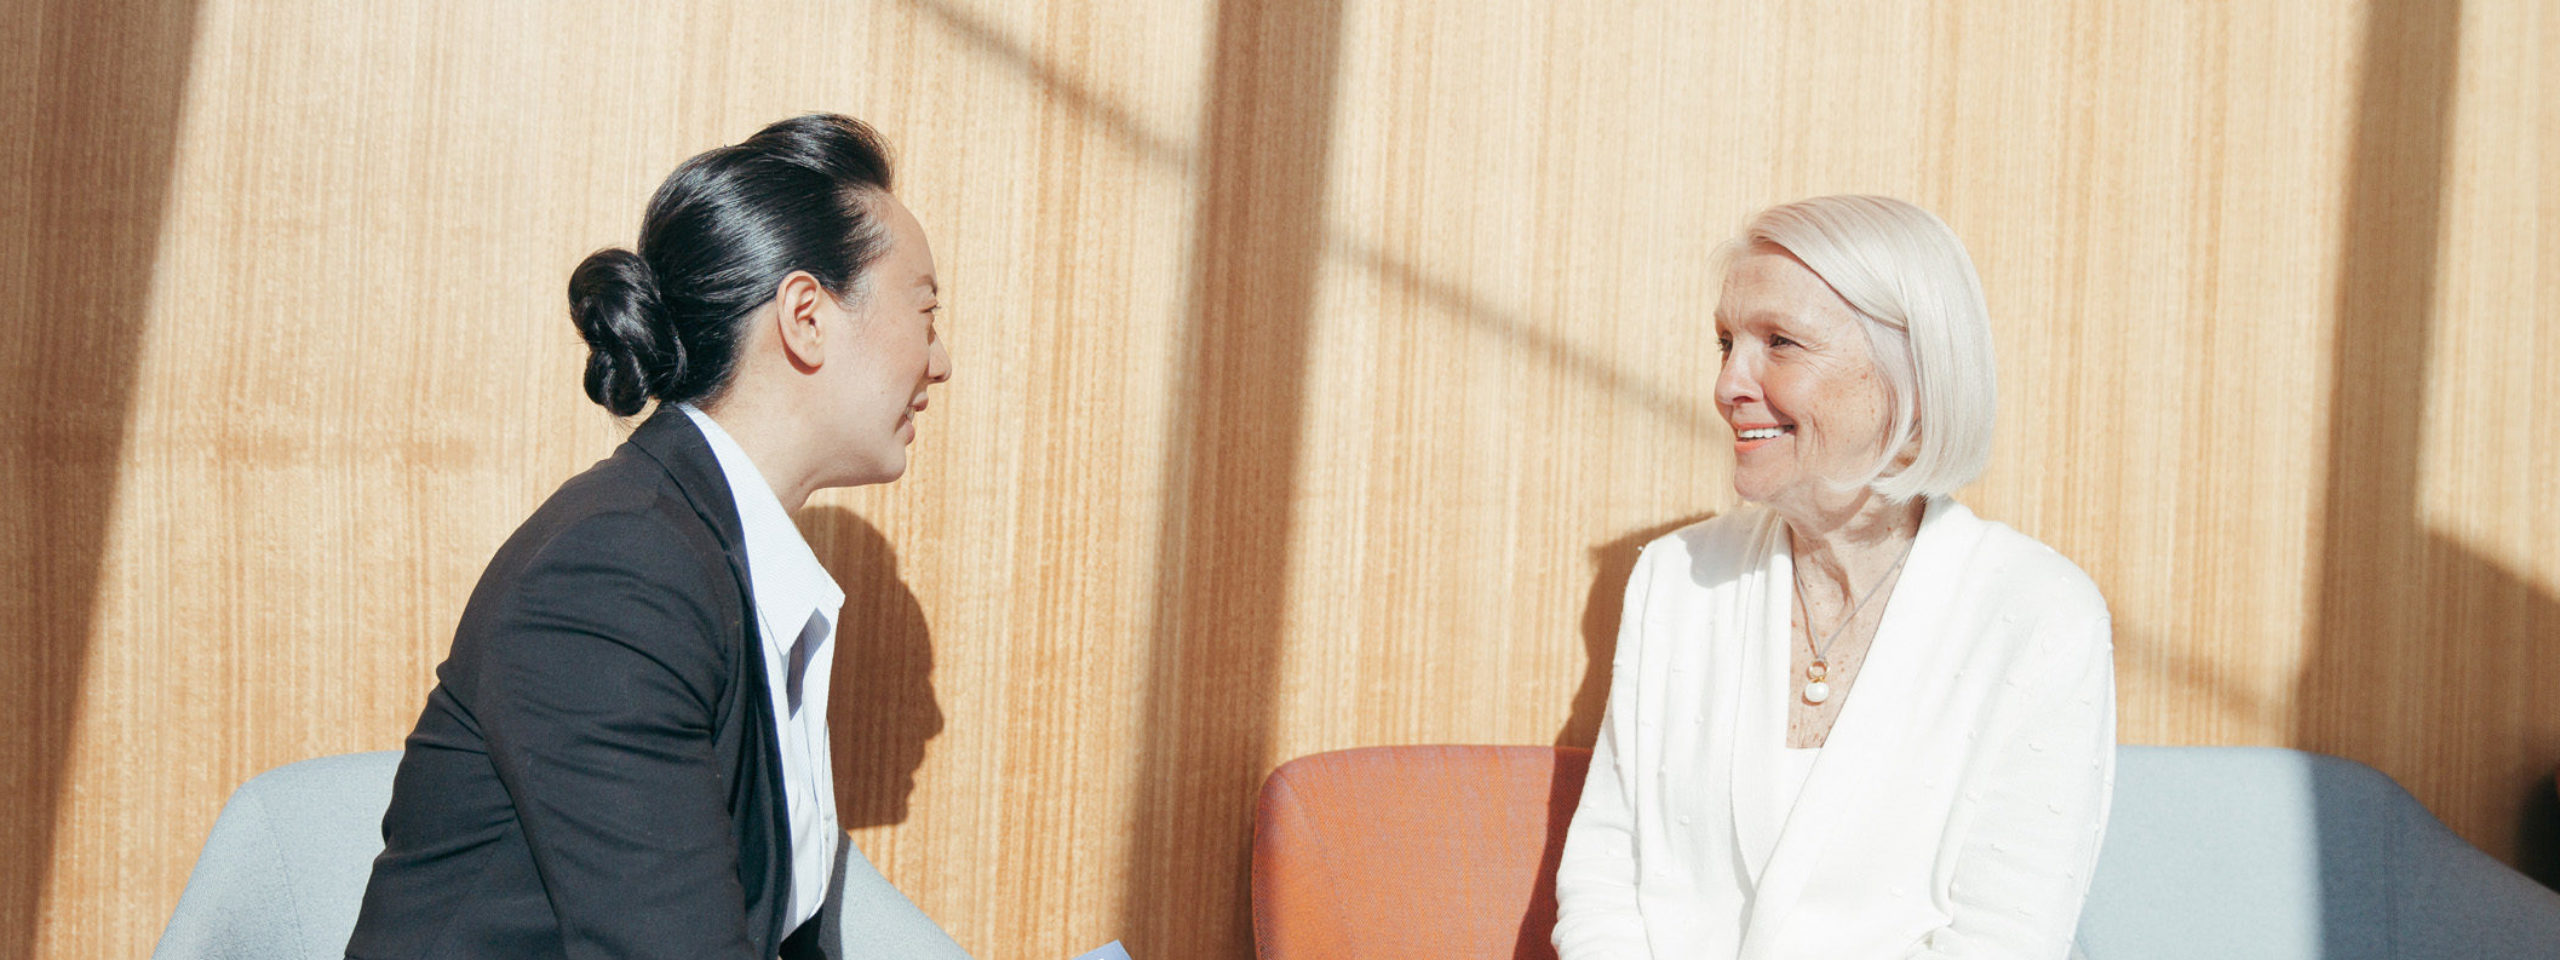 Female staff member talking to older female patient about patient privacy